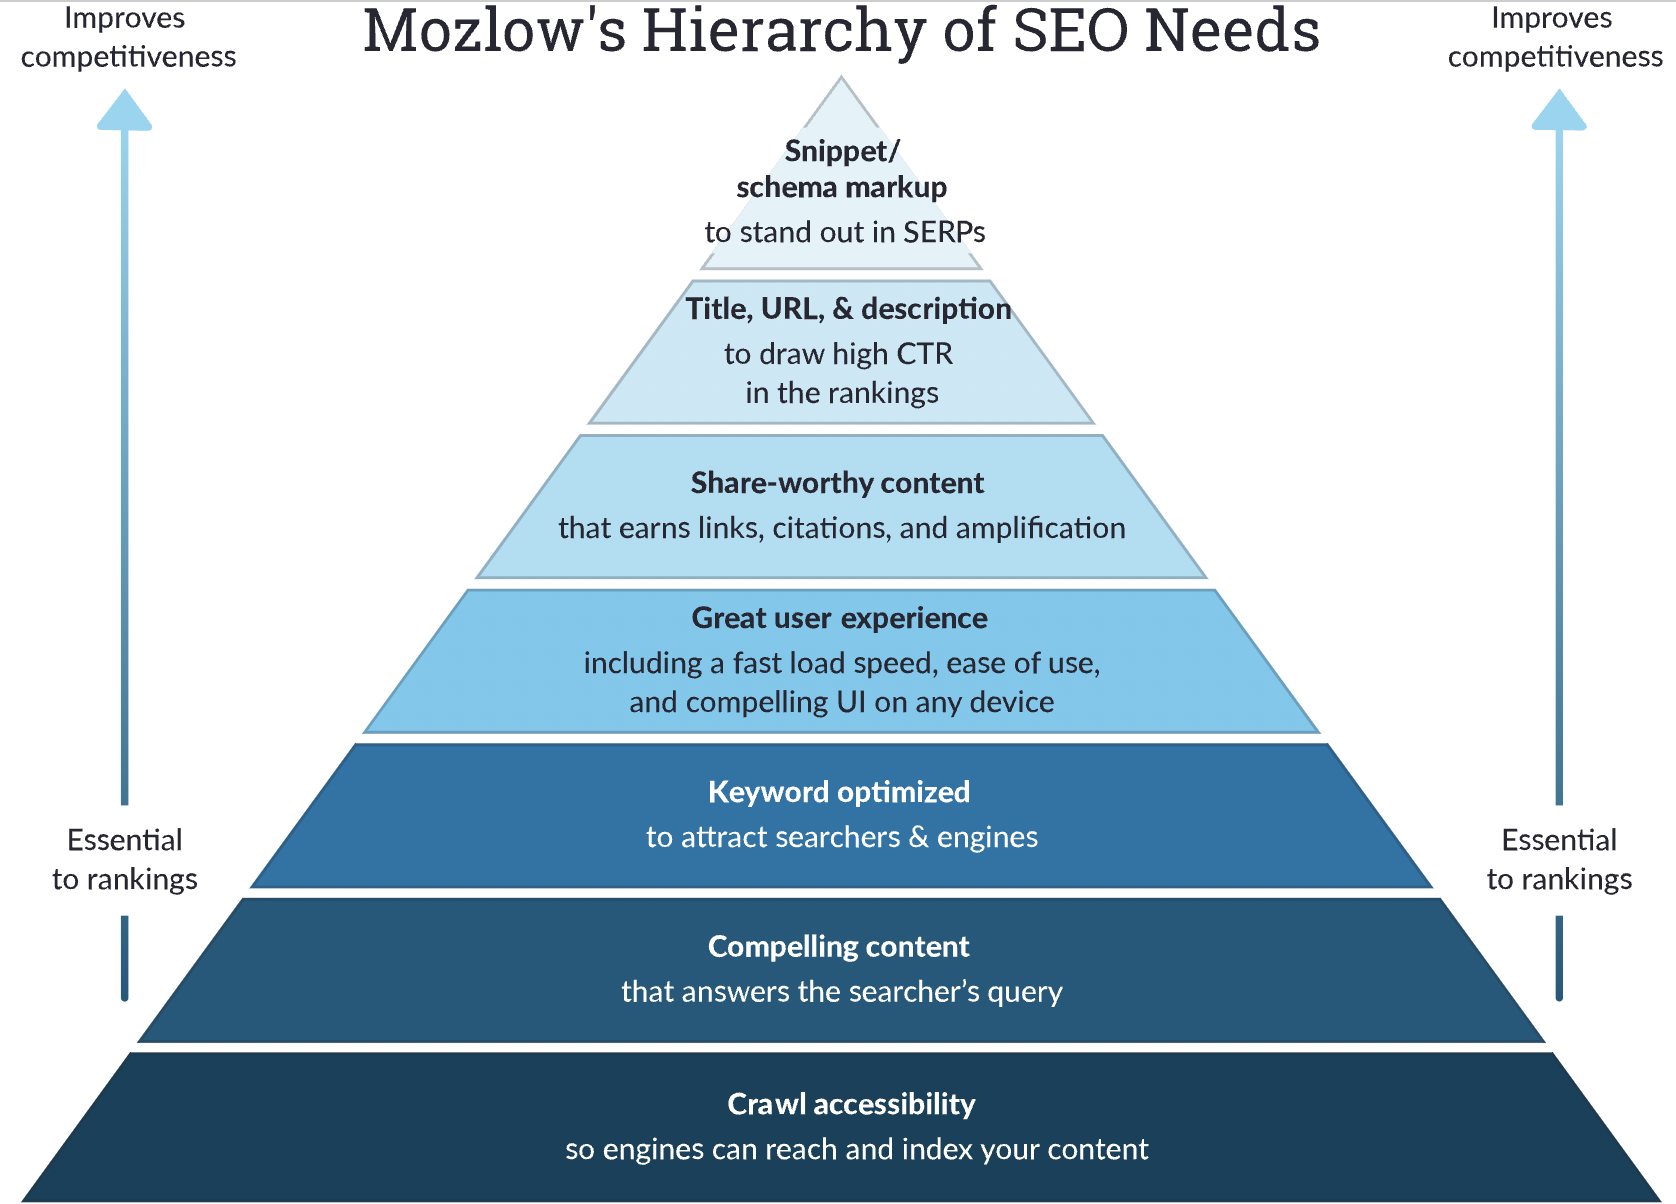 search engine optimization according to moz